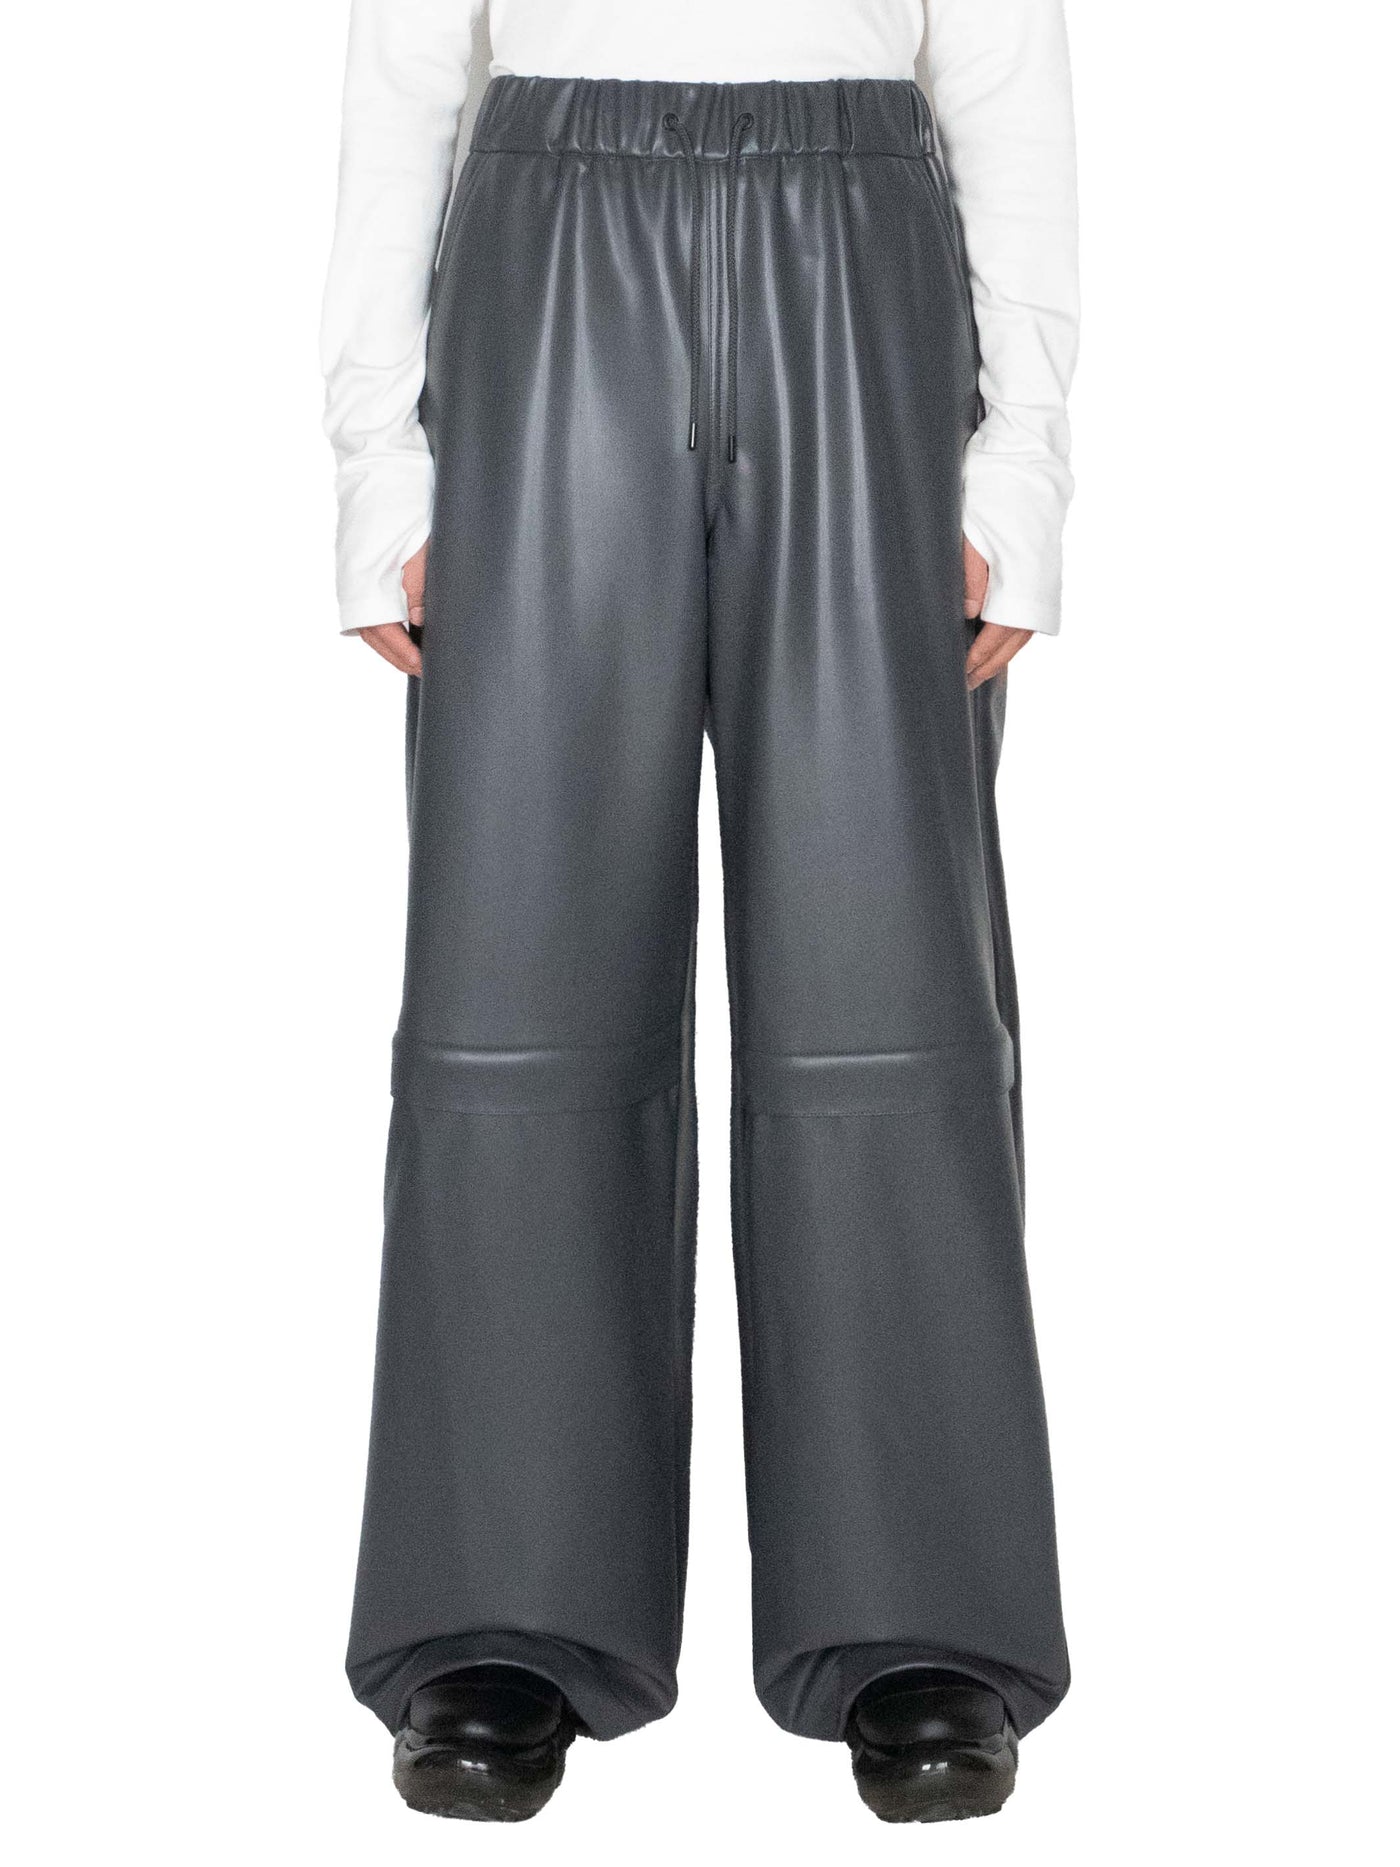 Stretch vegan leather wide pants